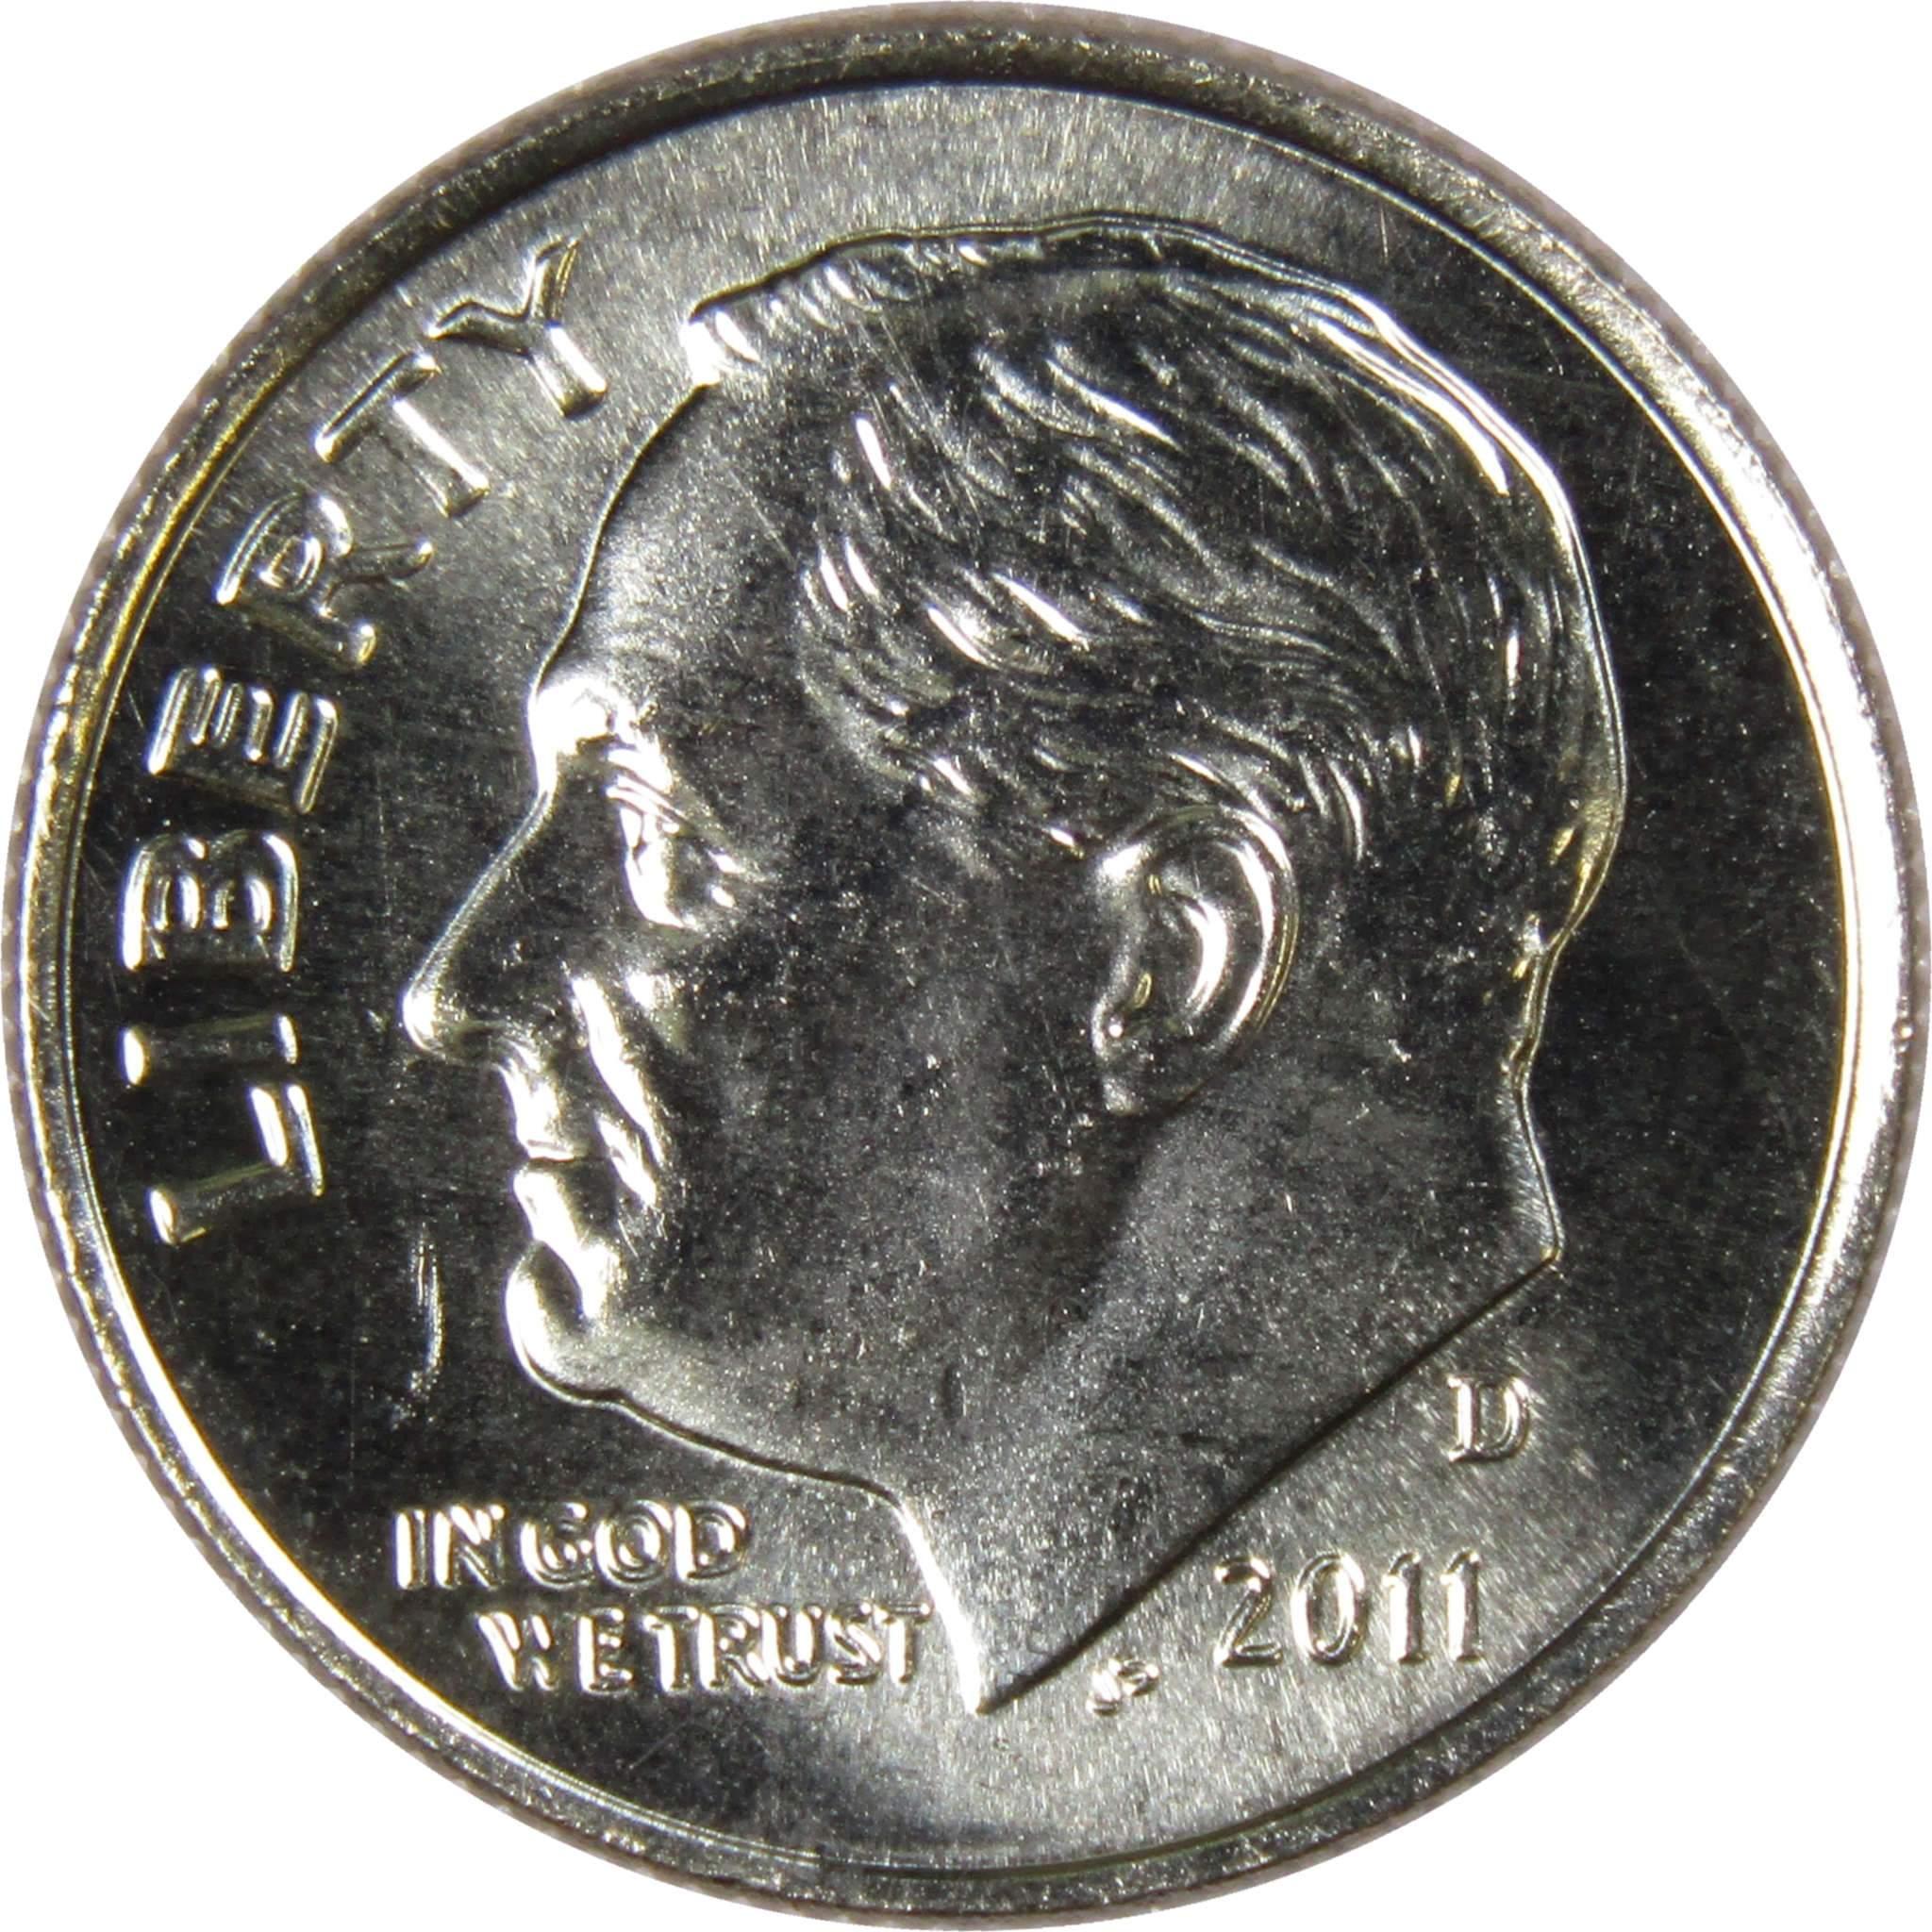 2011 D Roosevelt Dime BU Uncirculated Mint State 10c US Coin Collectible